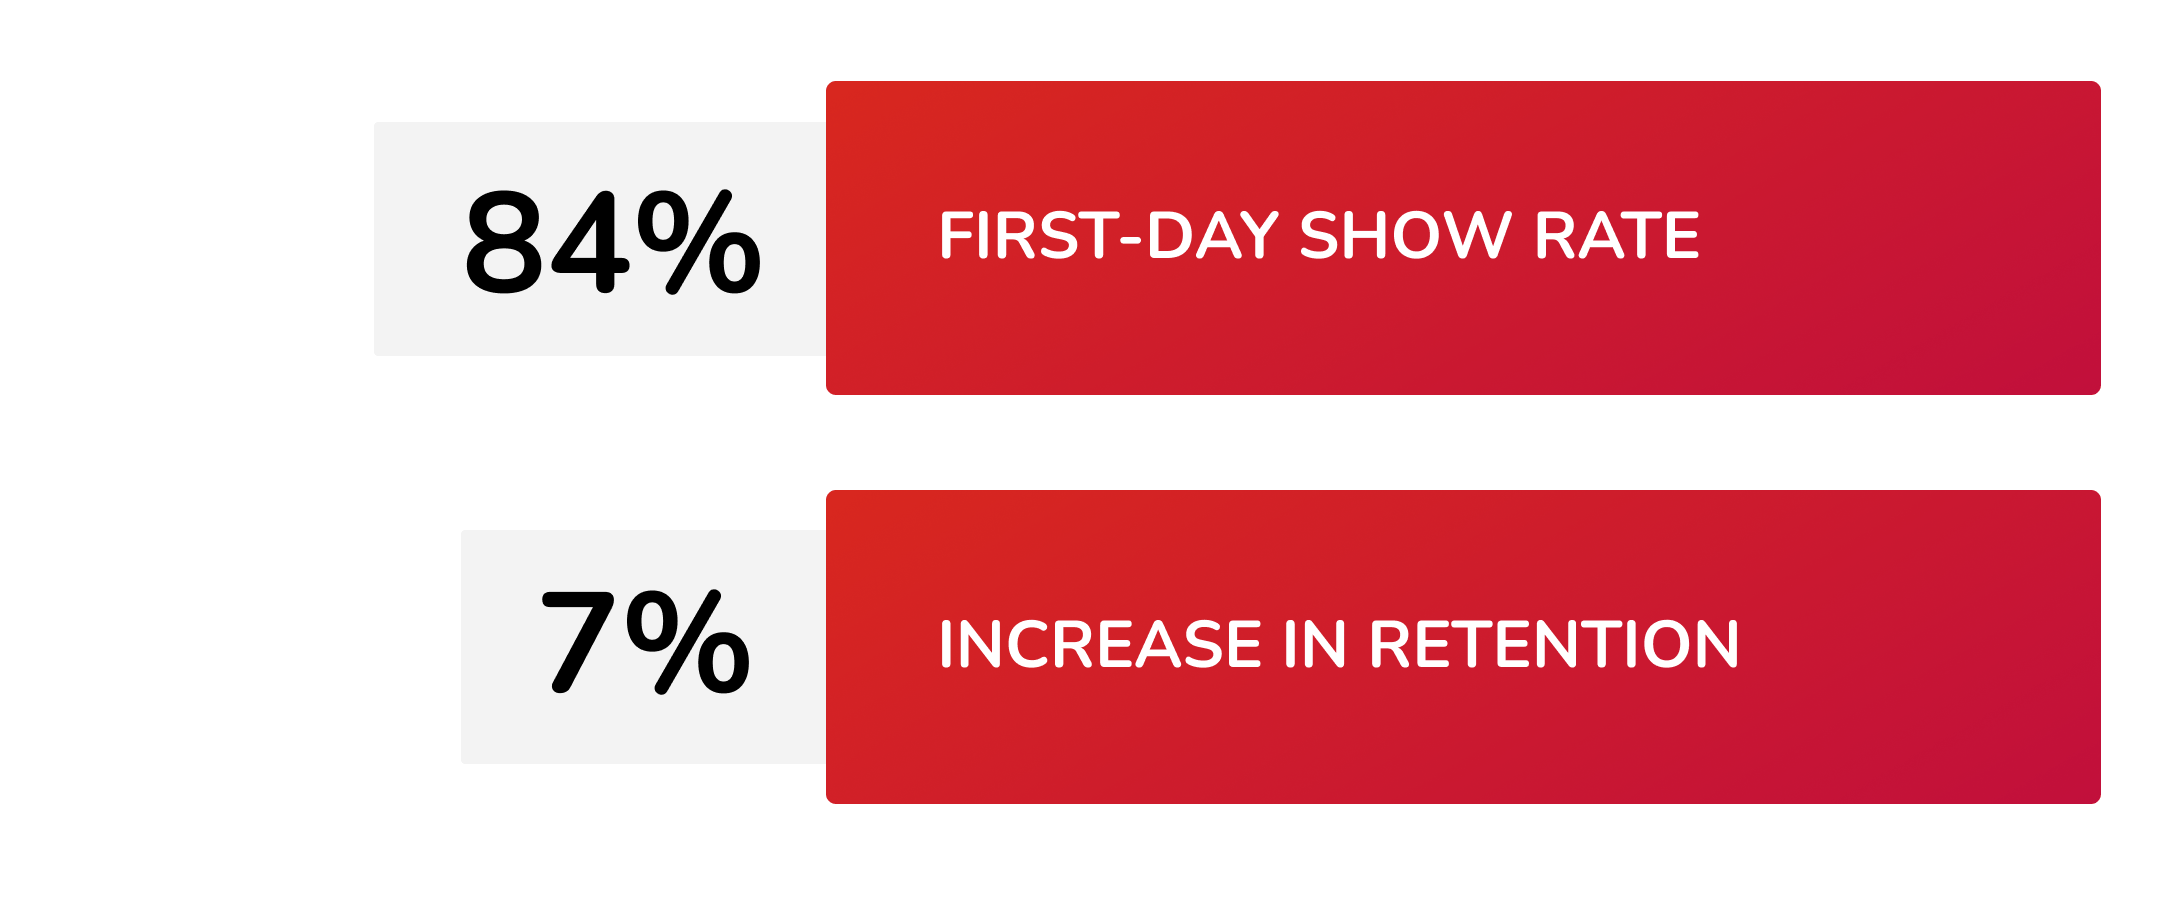 84% first-day show rate, 7% increase in retention